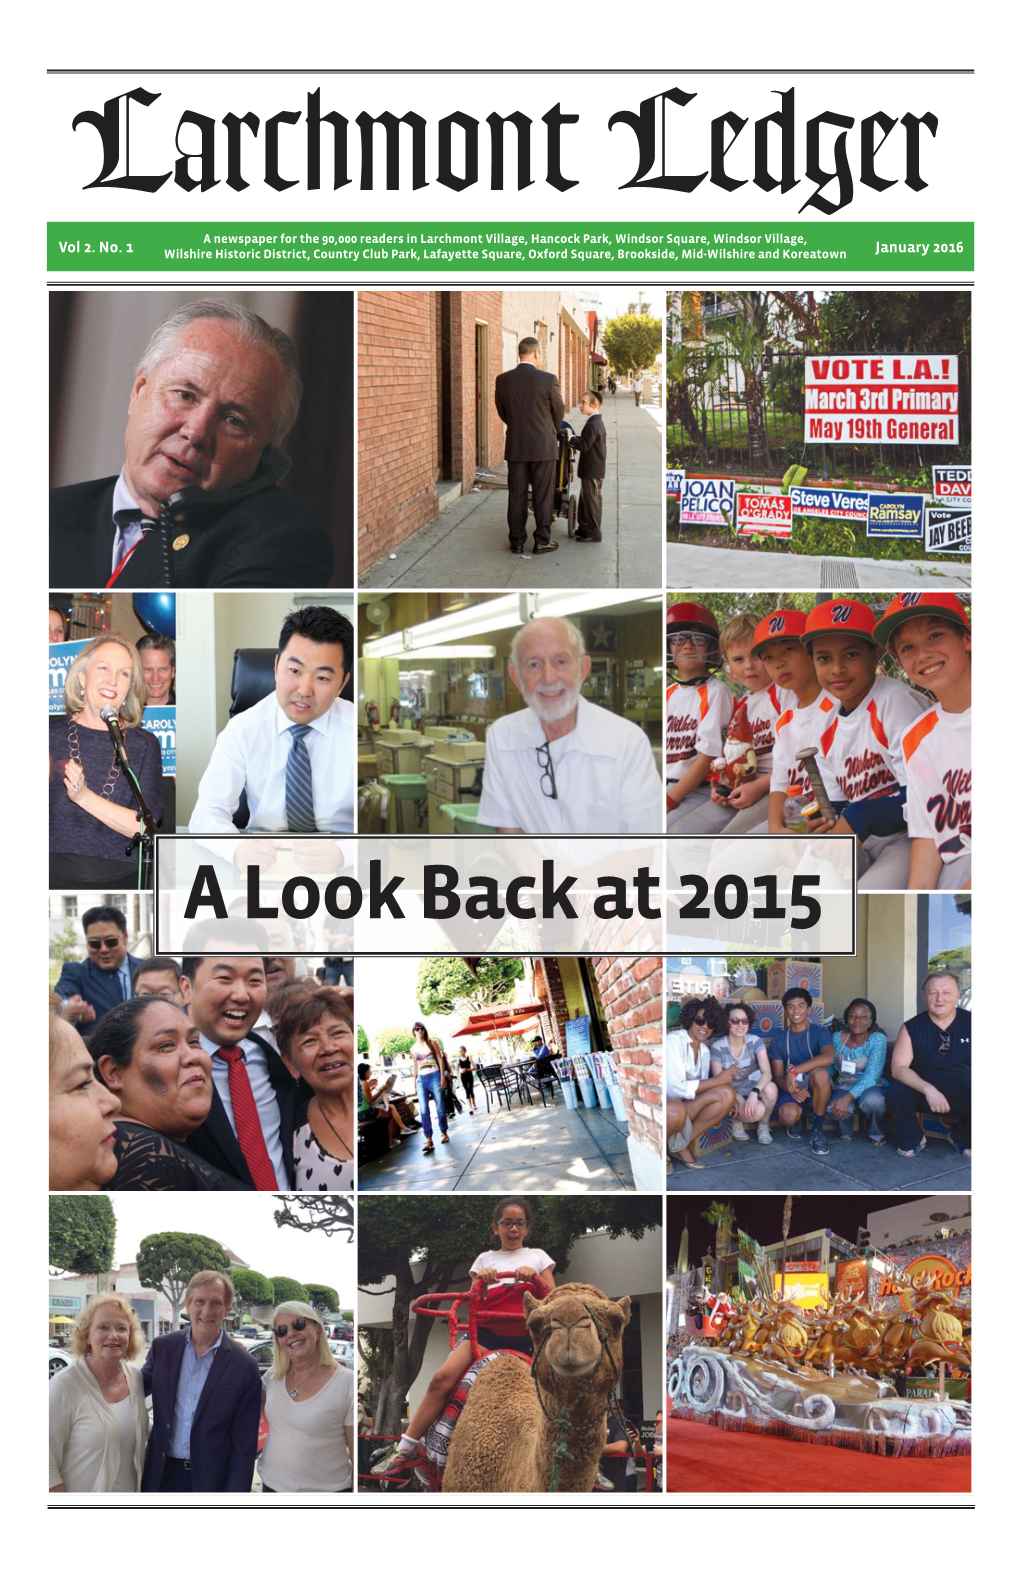 A Look Back at 2015